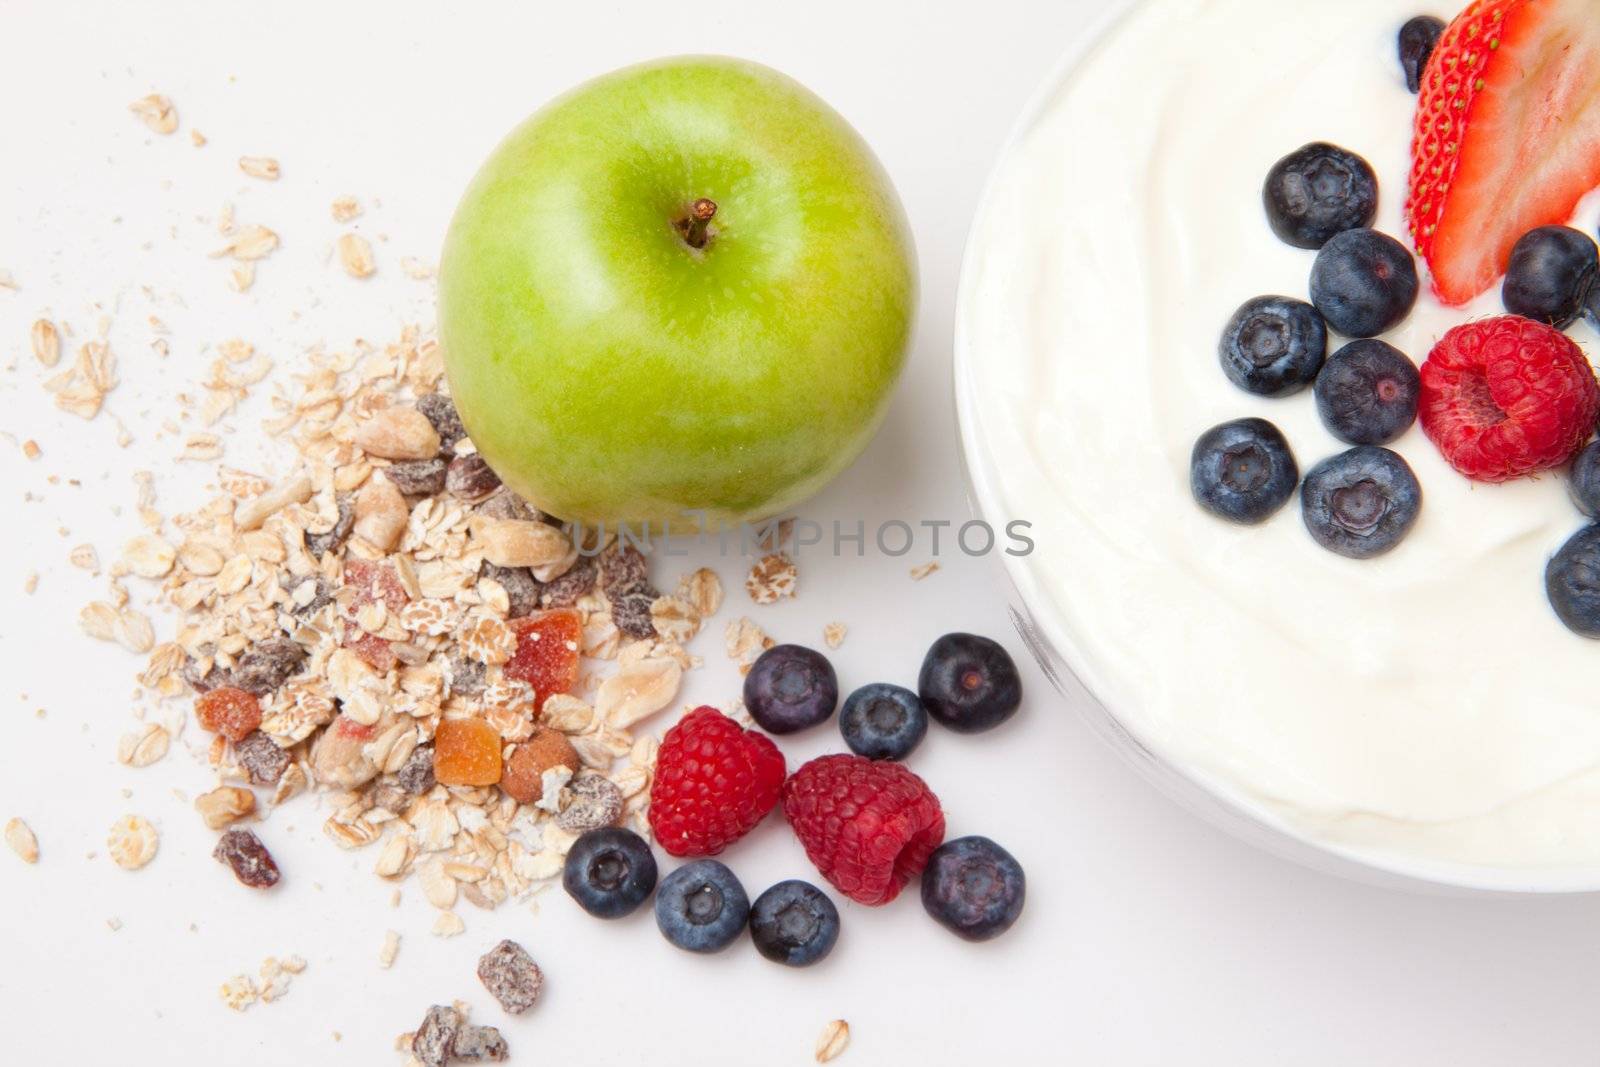 Healthy eating  with fruits against a white background